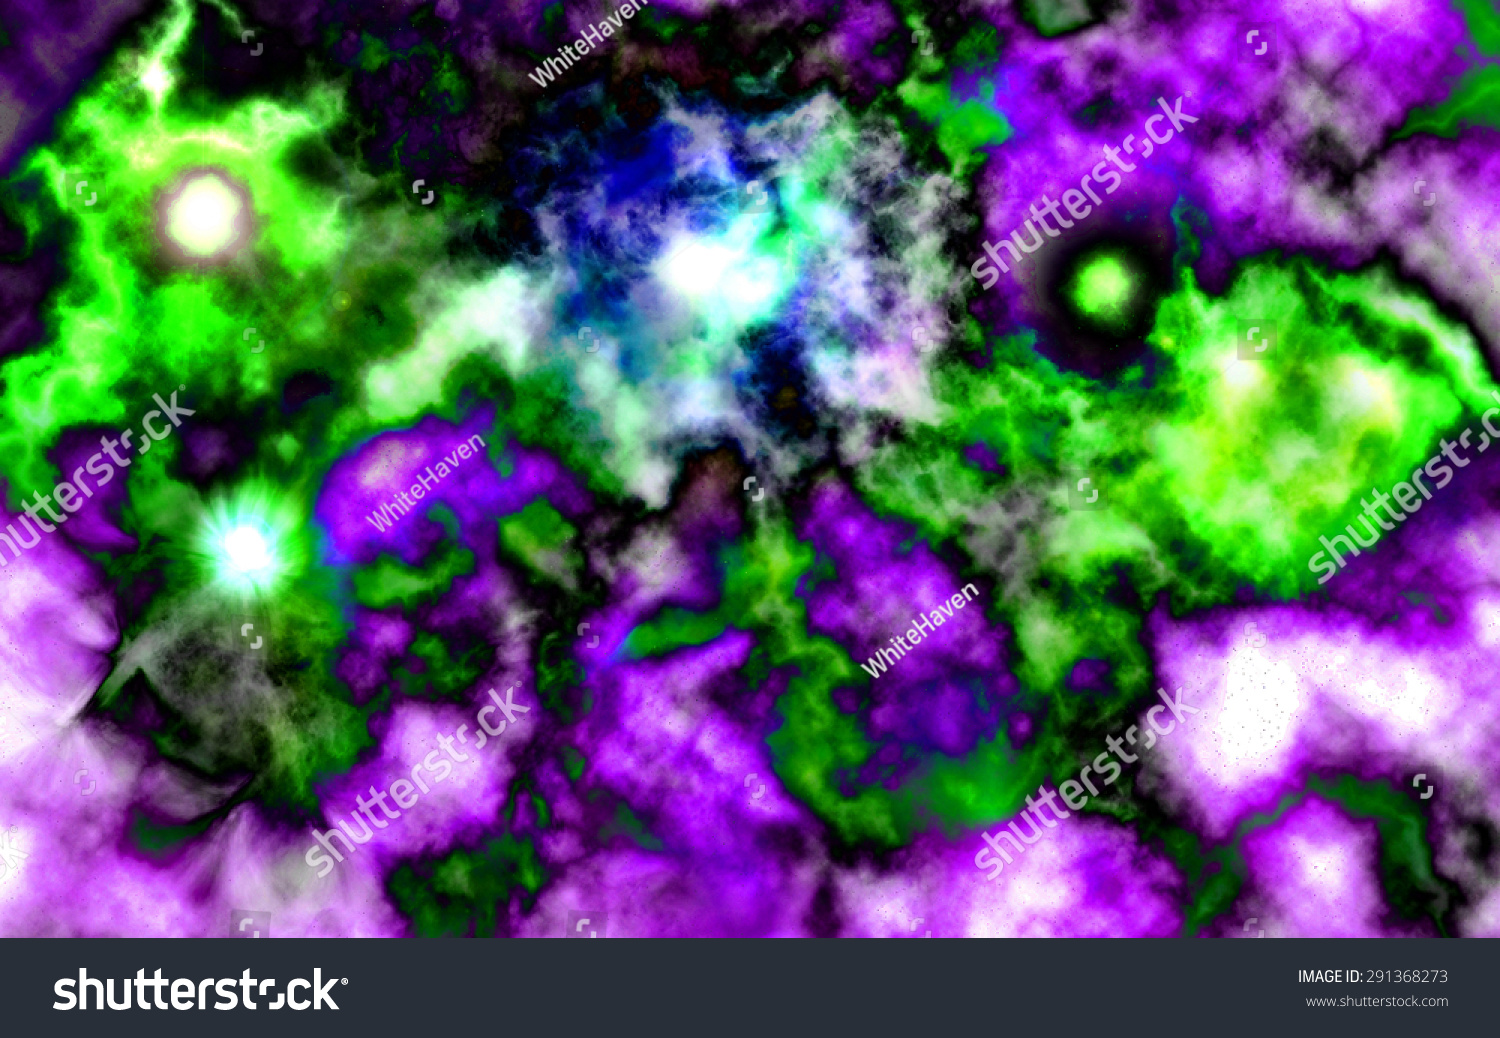 High Resolution Space Background Vividly Colored Stock Illustration 291368273 Shutterstock 2010